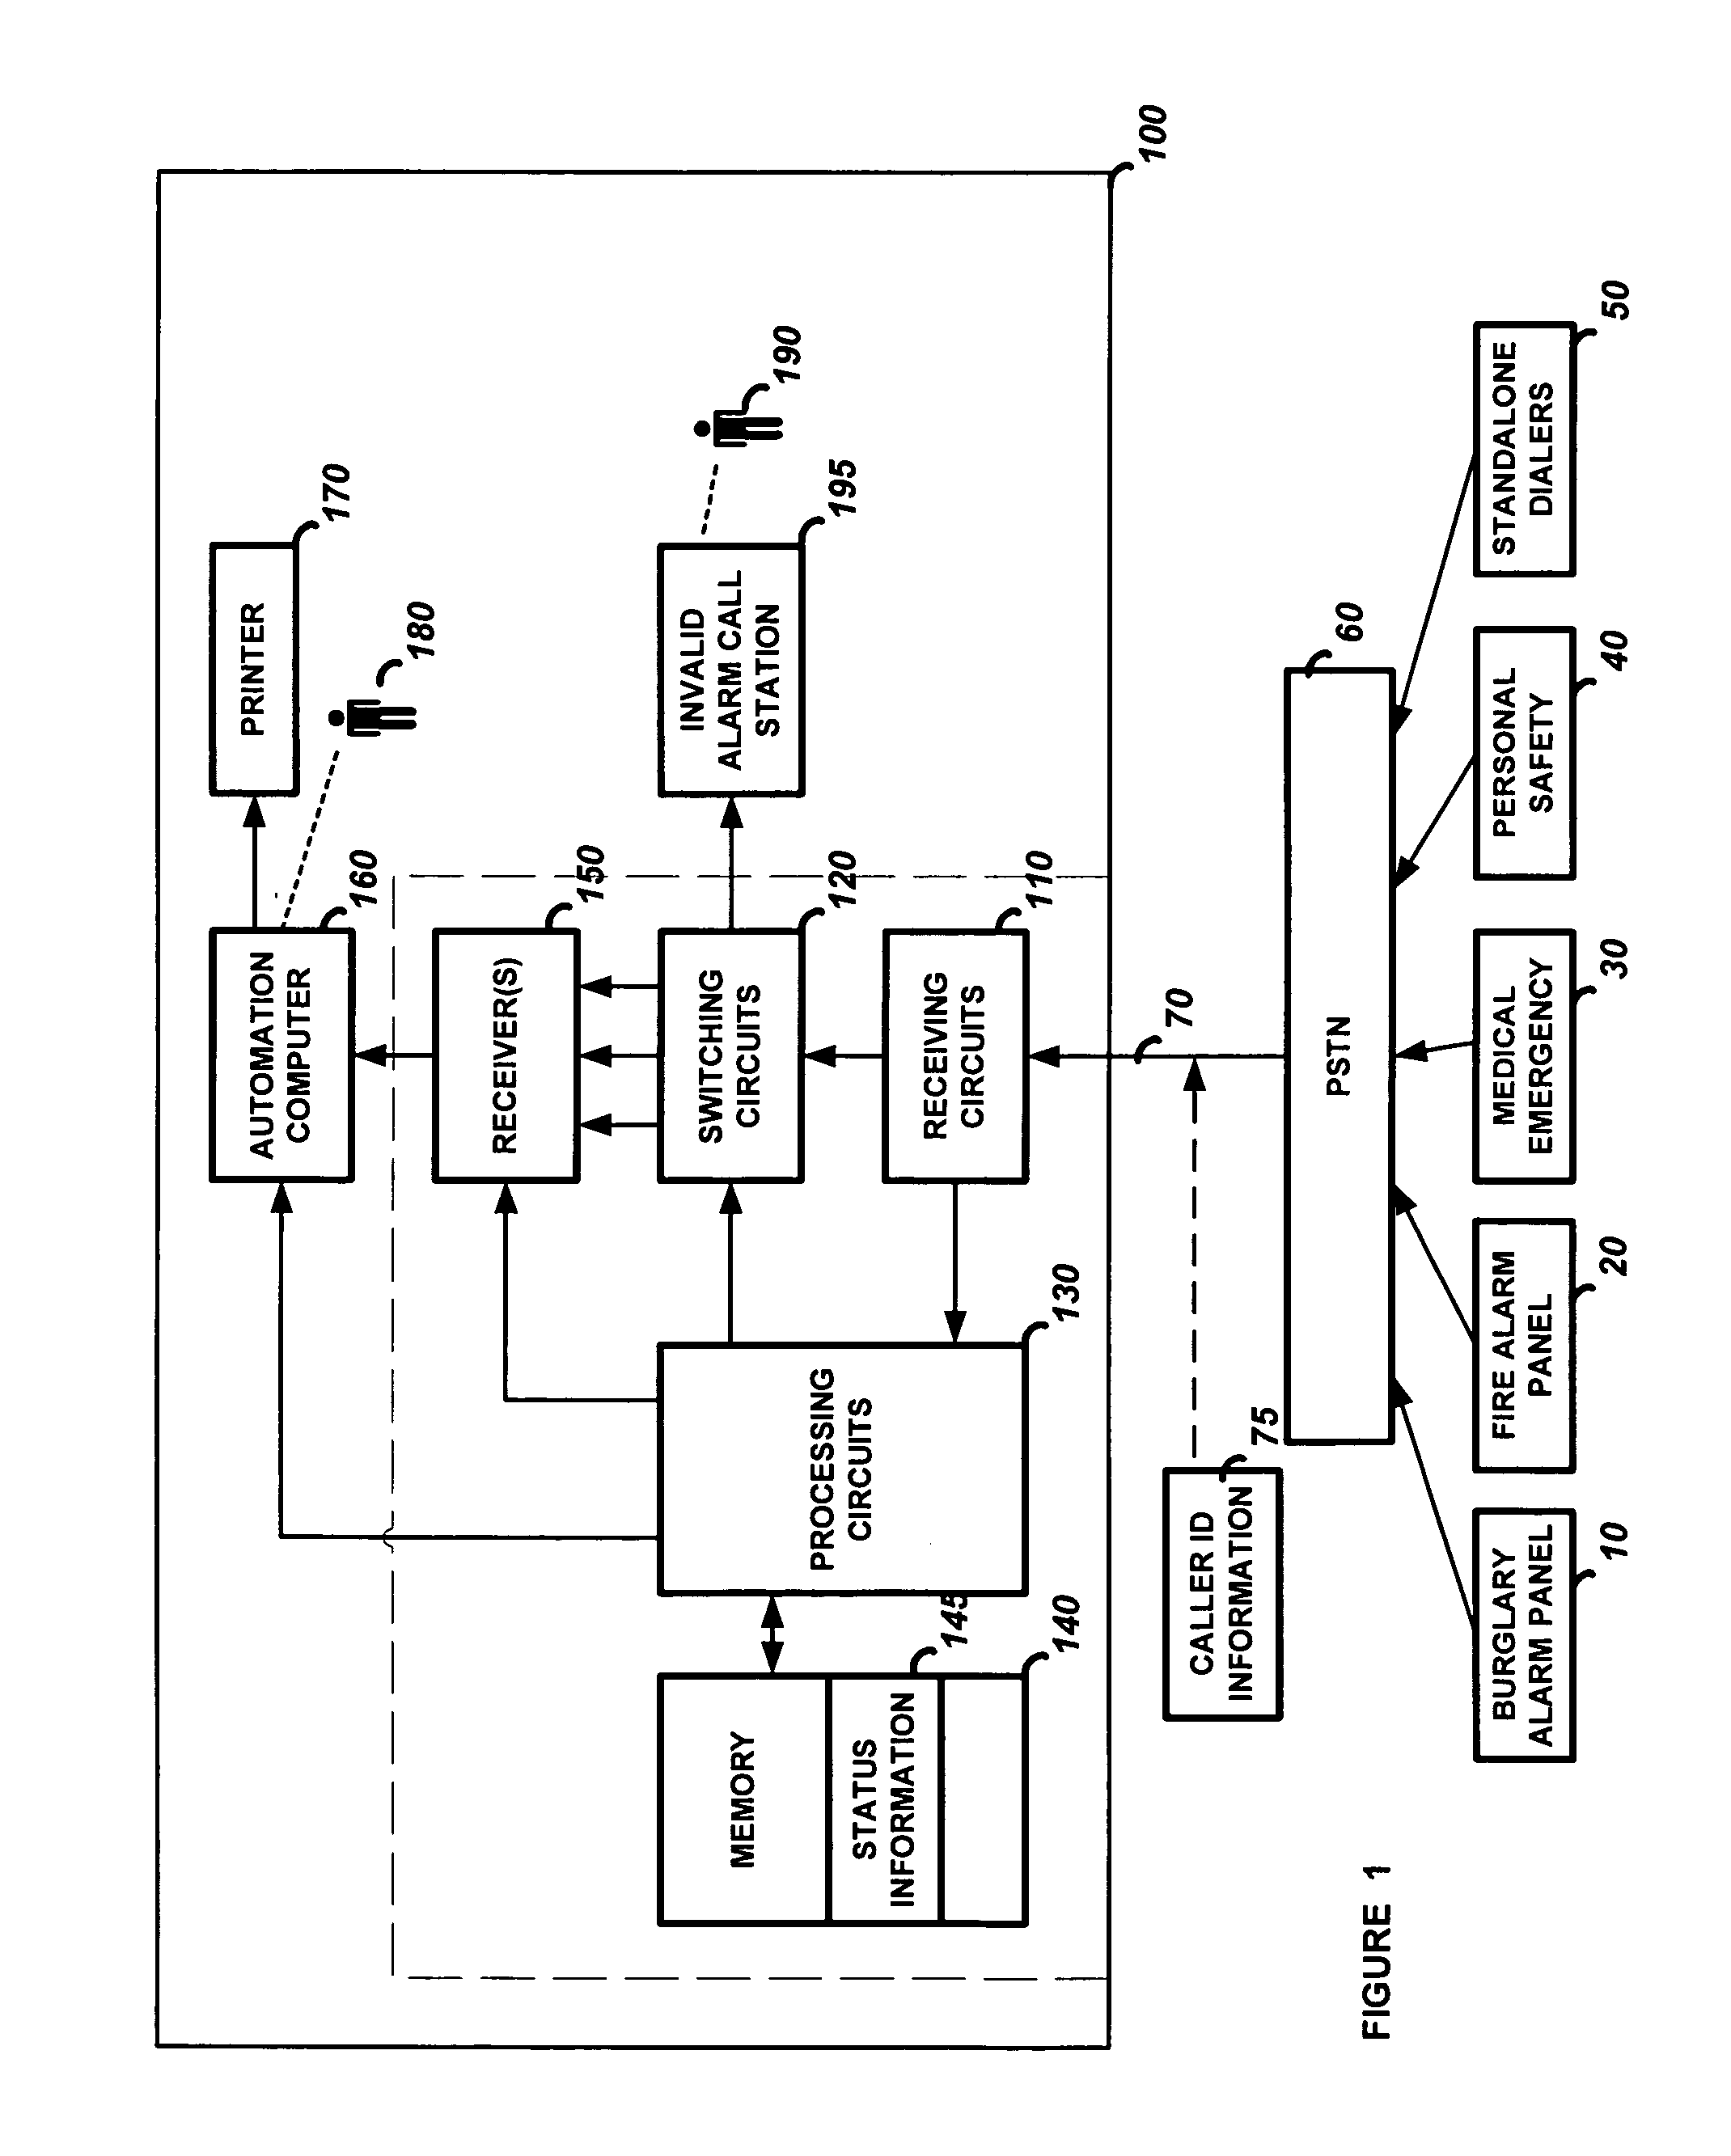 Central monitoring station with method to process call based on call source identification information